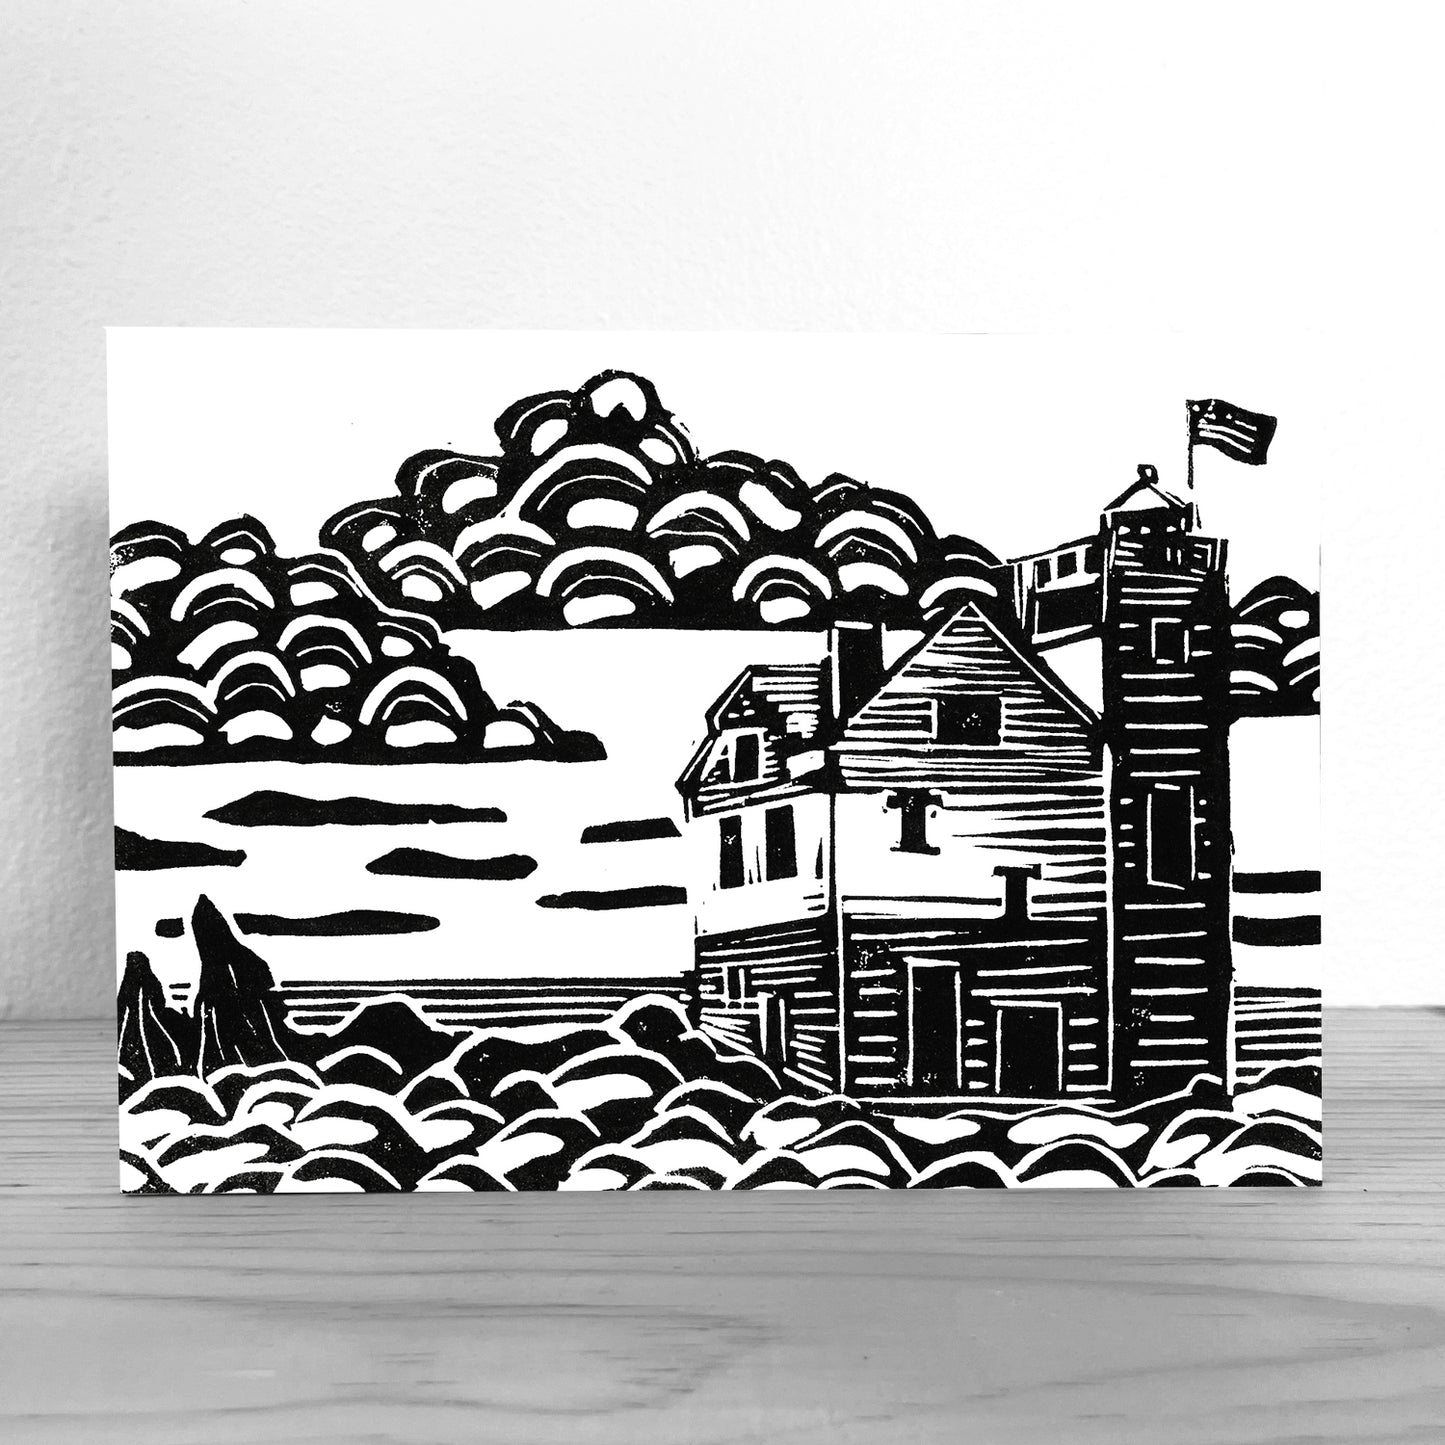 This  giclée is a fine art reproduction of a linoleum block print by Natalia Wohletz of Peninsula Prints inspired by Round Island Lighthouse located across the passage from Mackinac Island, Michigan.